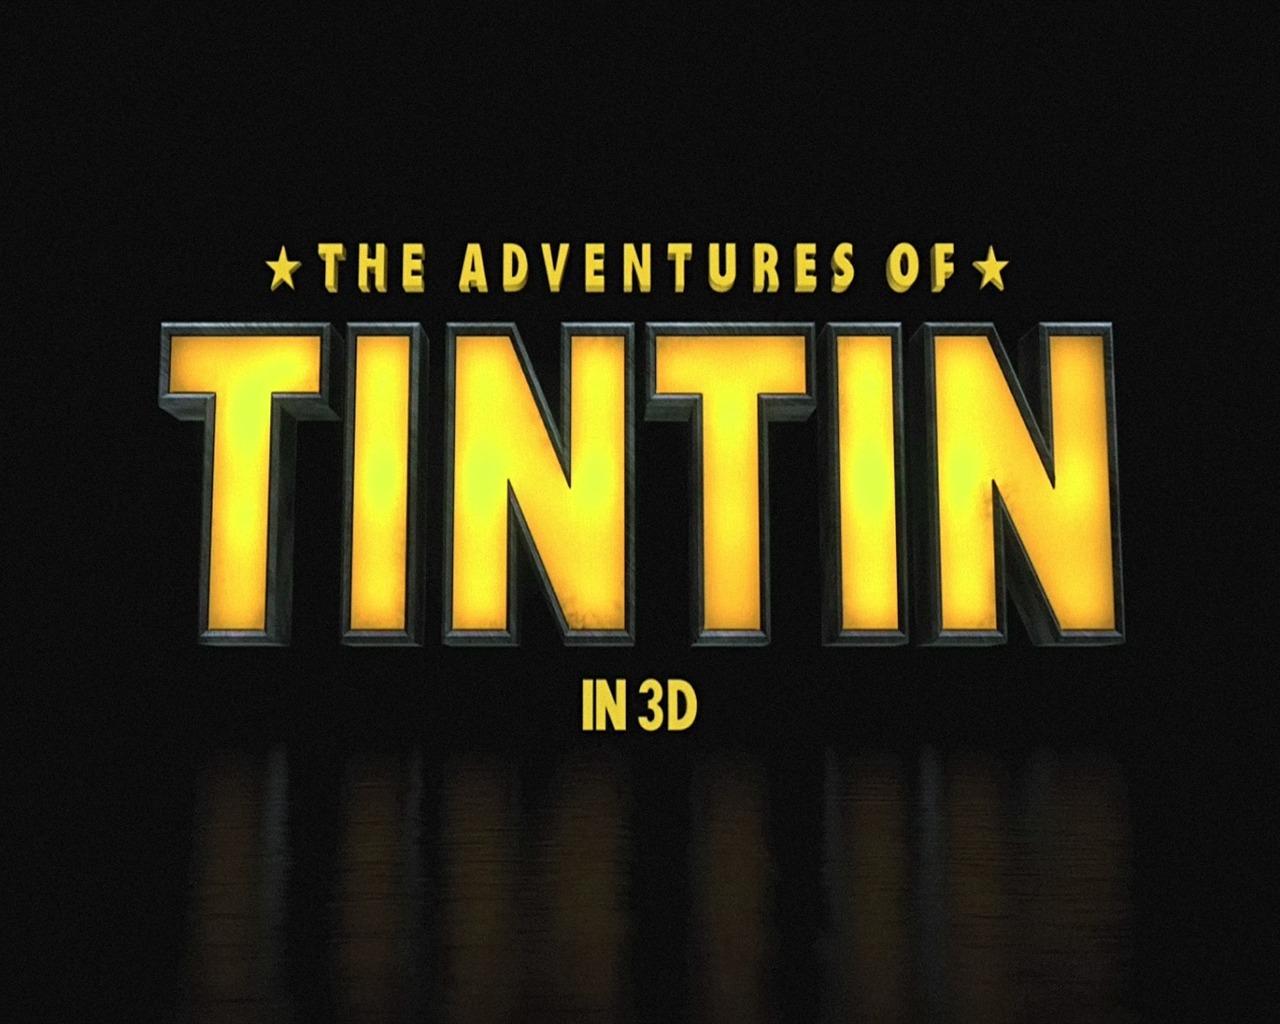 The Adventures of Tintin HD Wallpapers #14 - 1280x1024